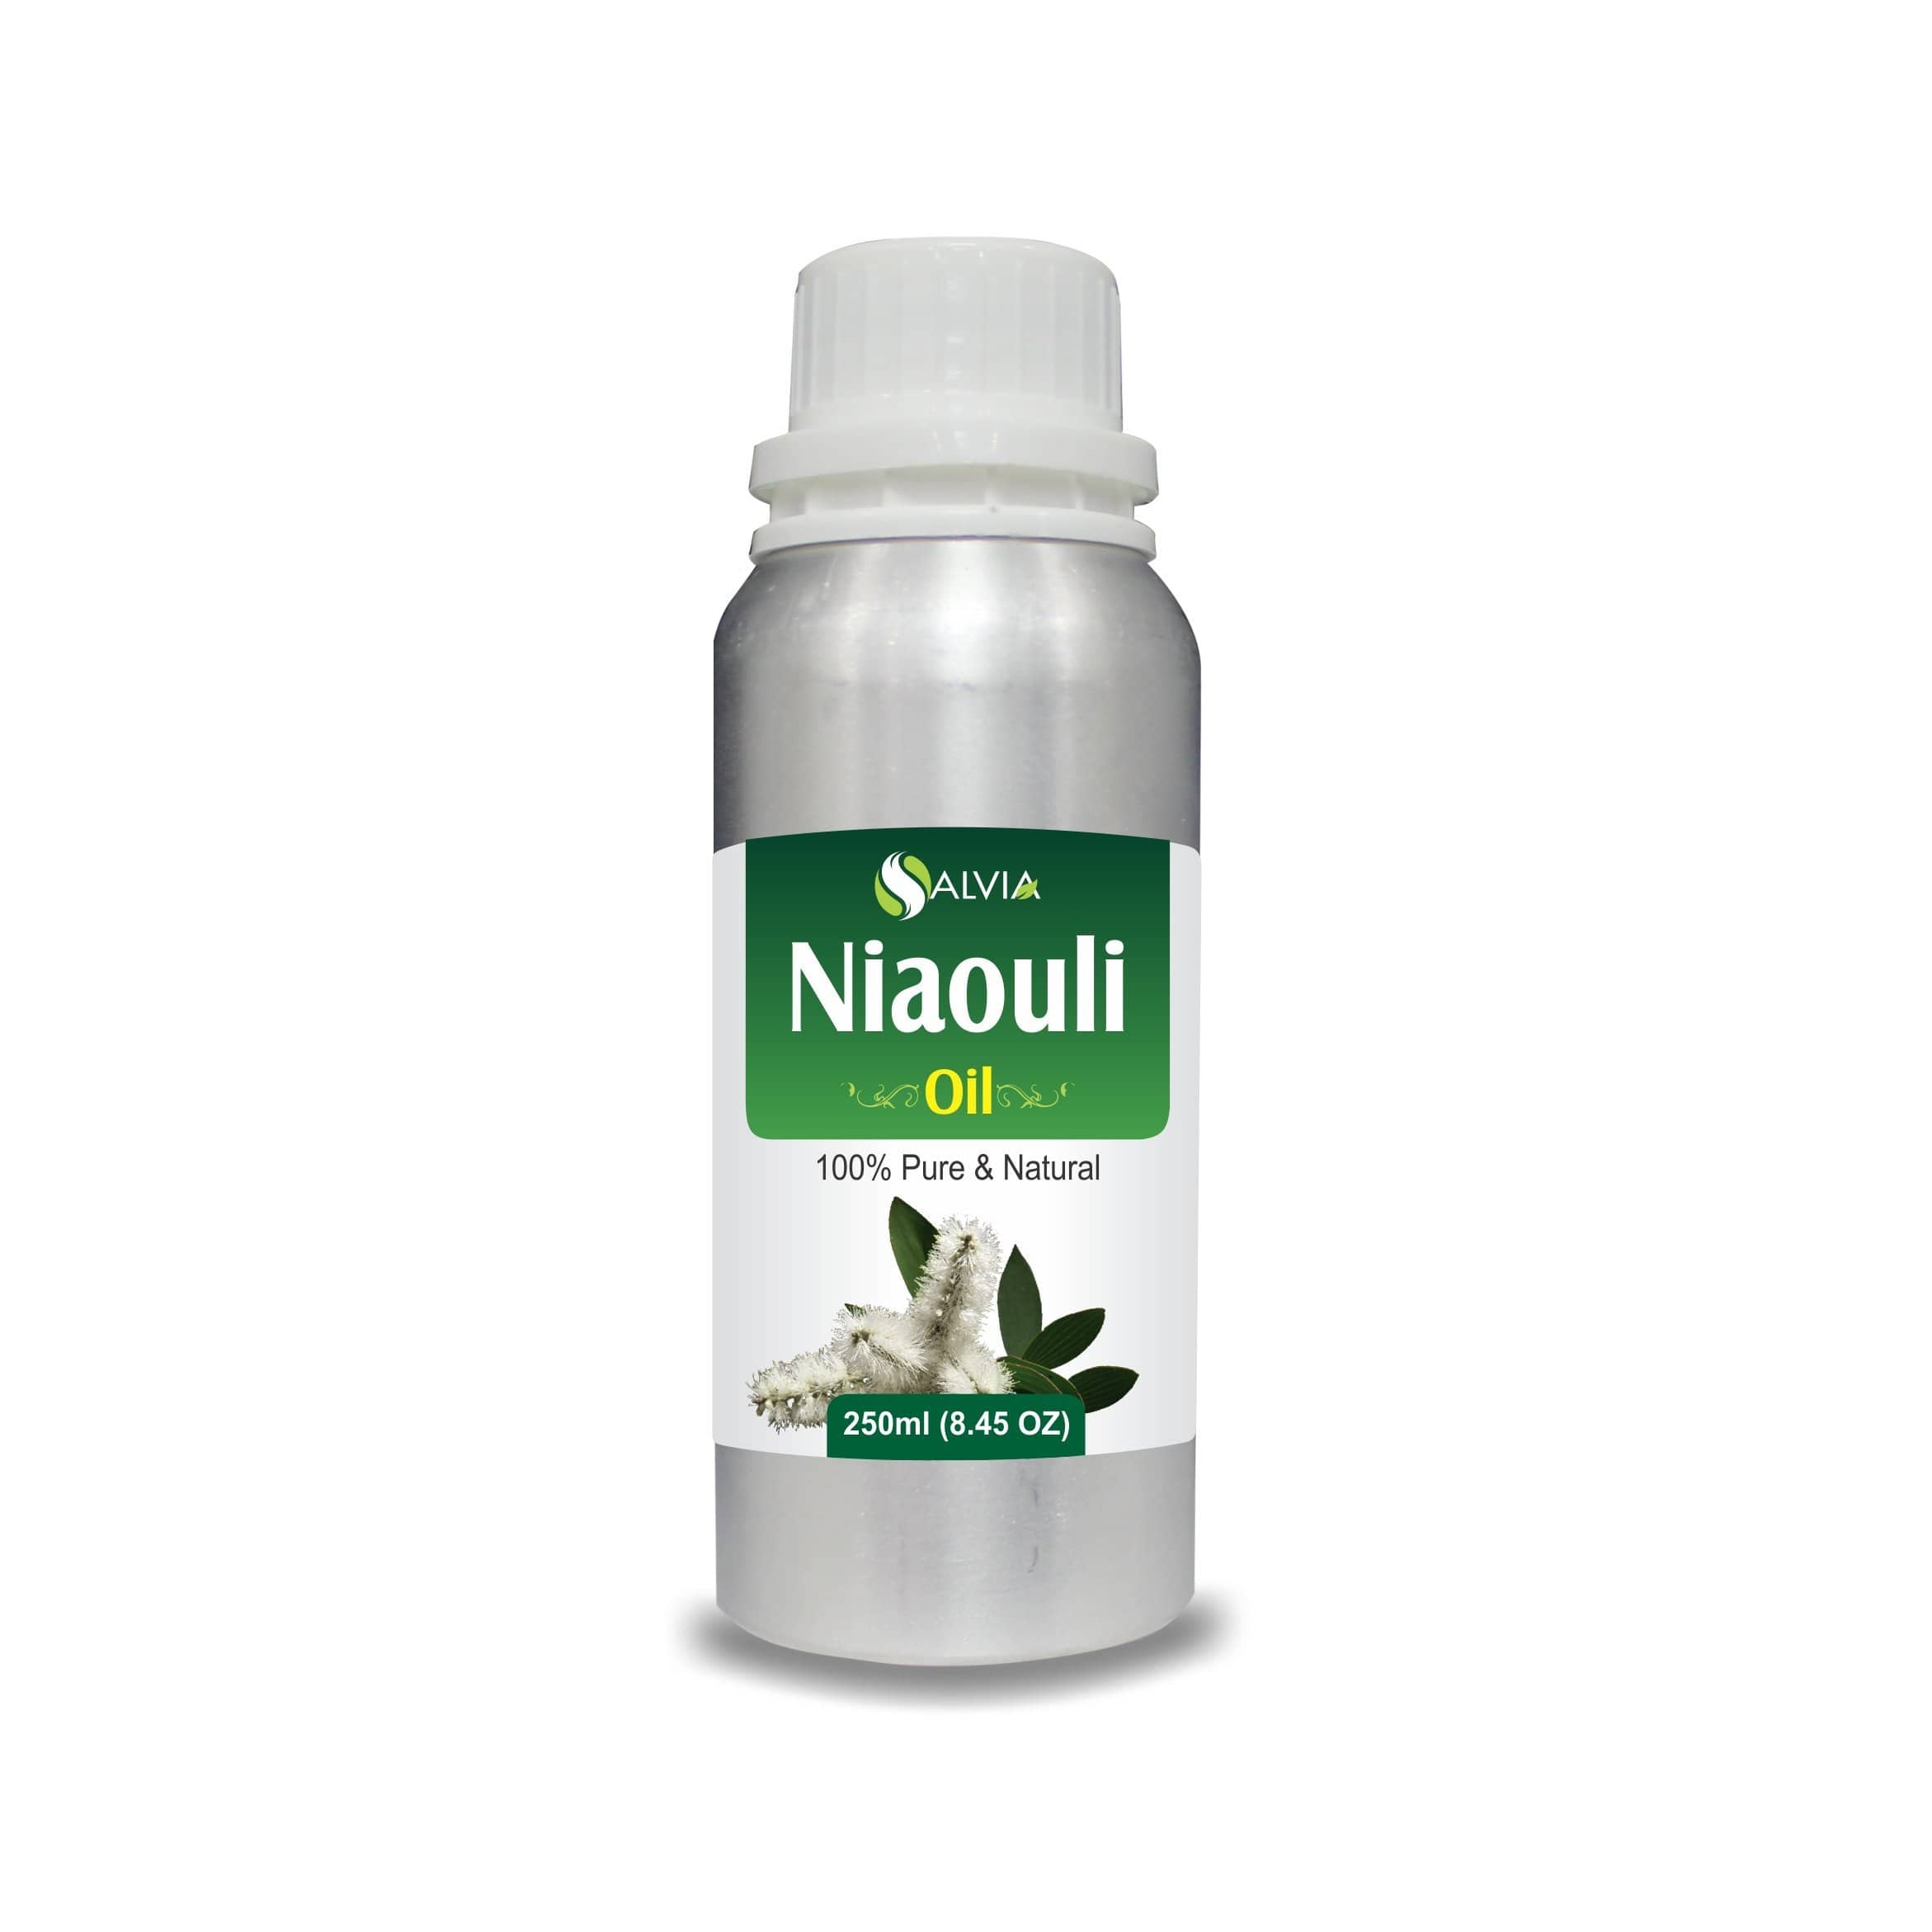 niaouli oil for acne